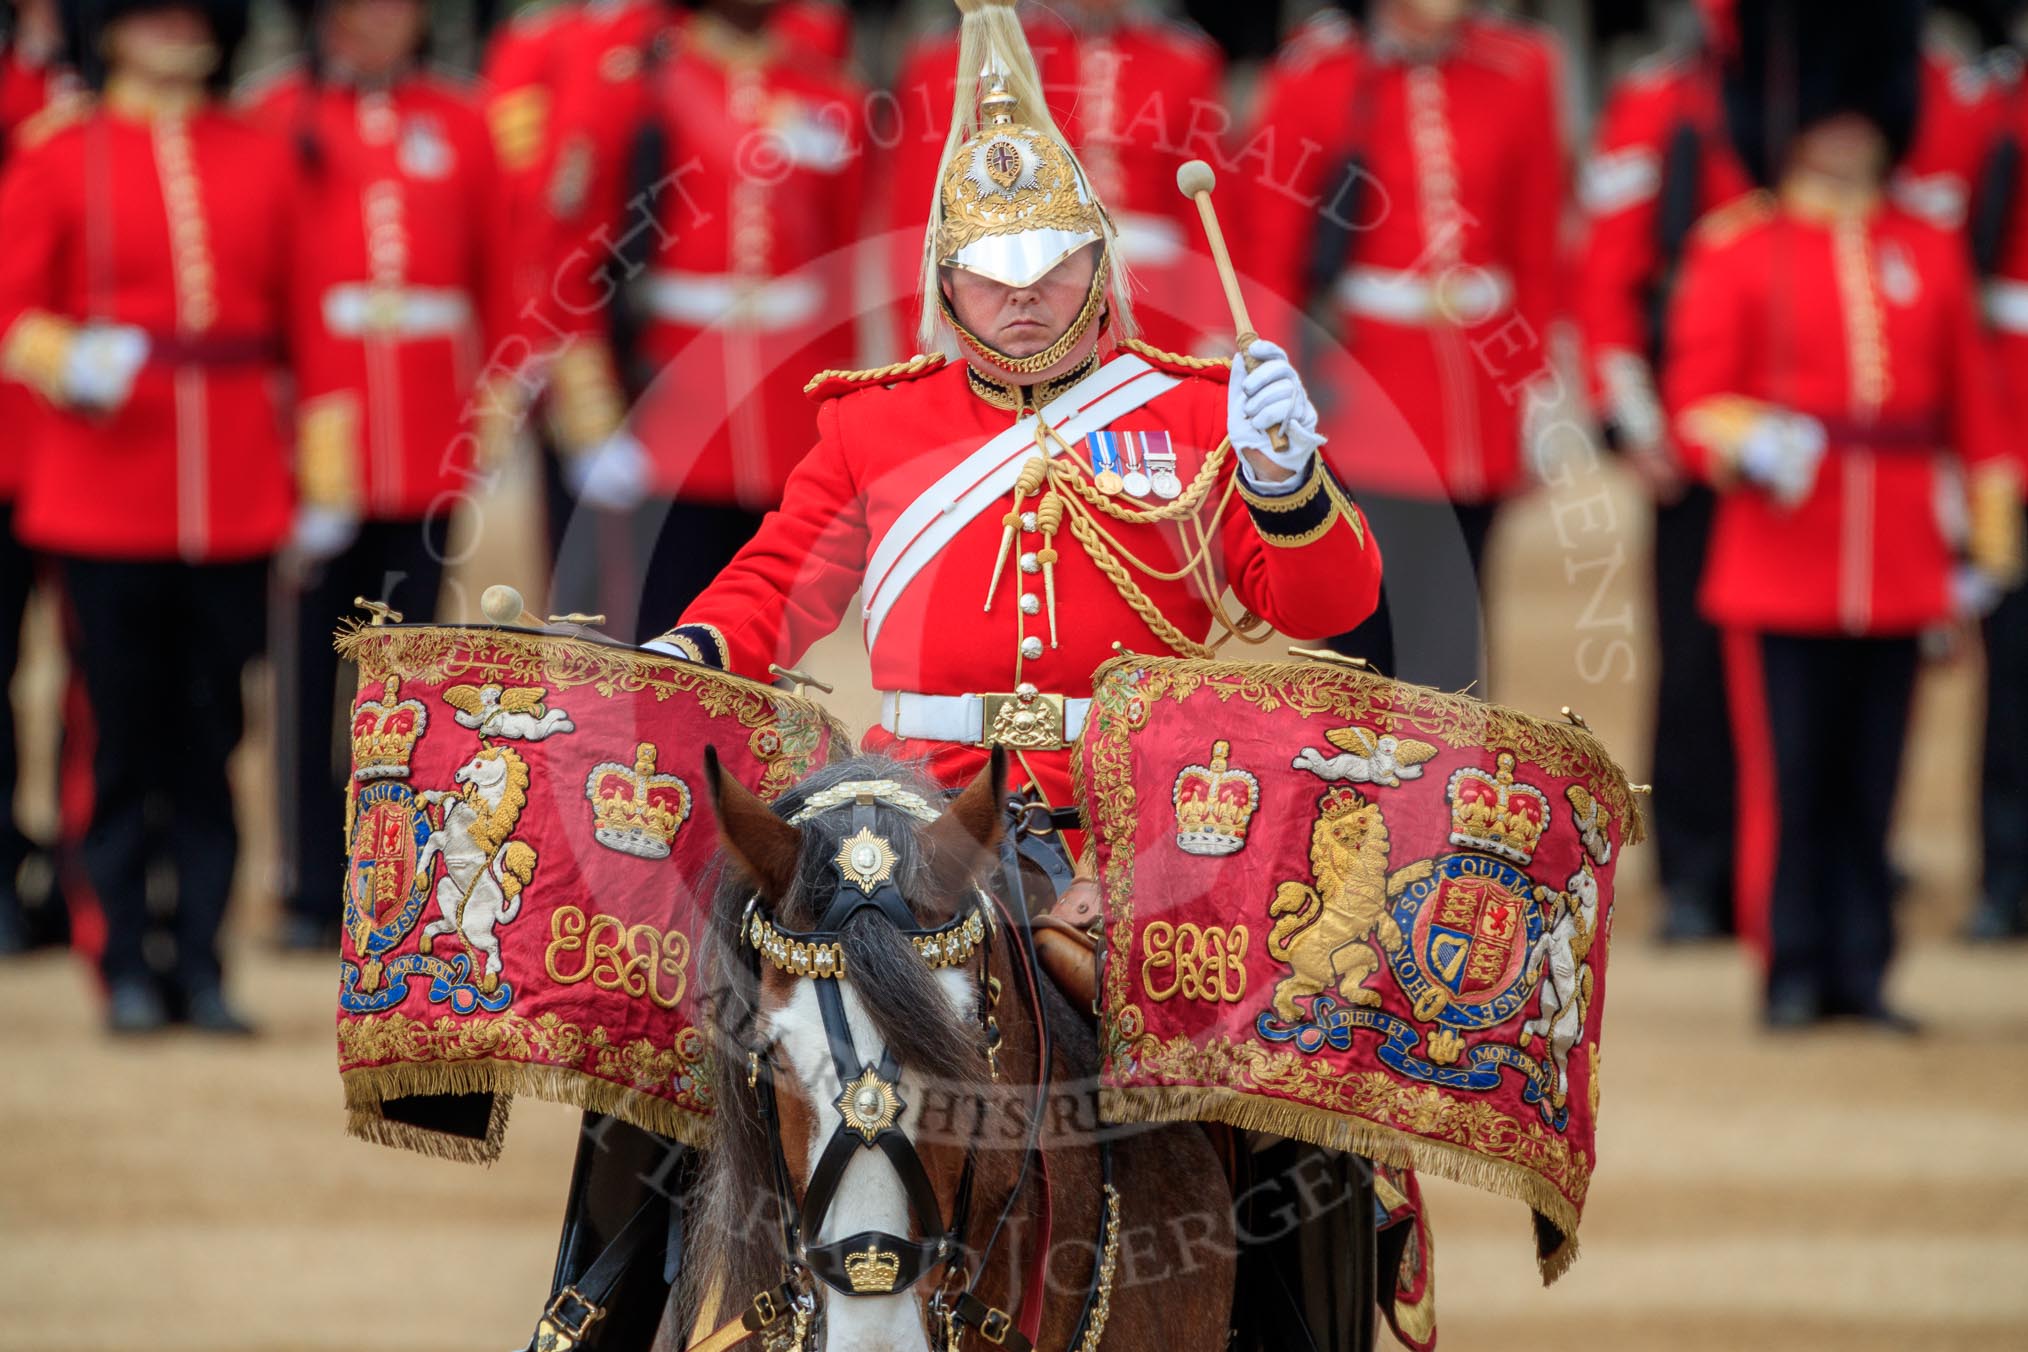 during The Colonel's Review {iptcyear4} (final rehearsal for Trooping the Colour, The Queen's Birthday Parade)  at Horse Guards Parade, Westminster, London, 2 June 2018, 11:56.